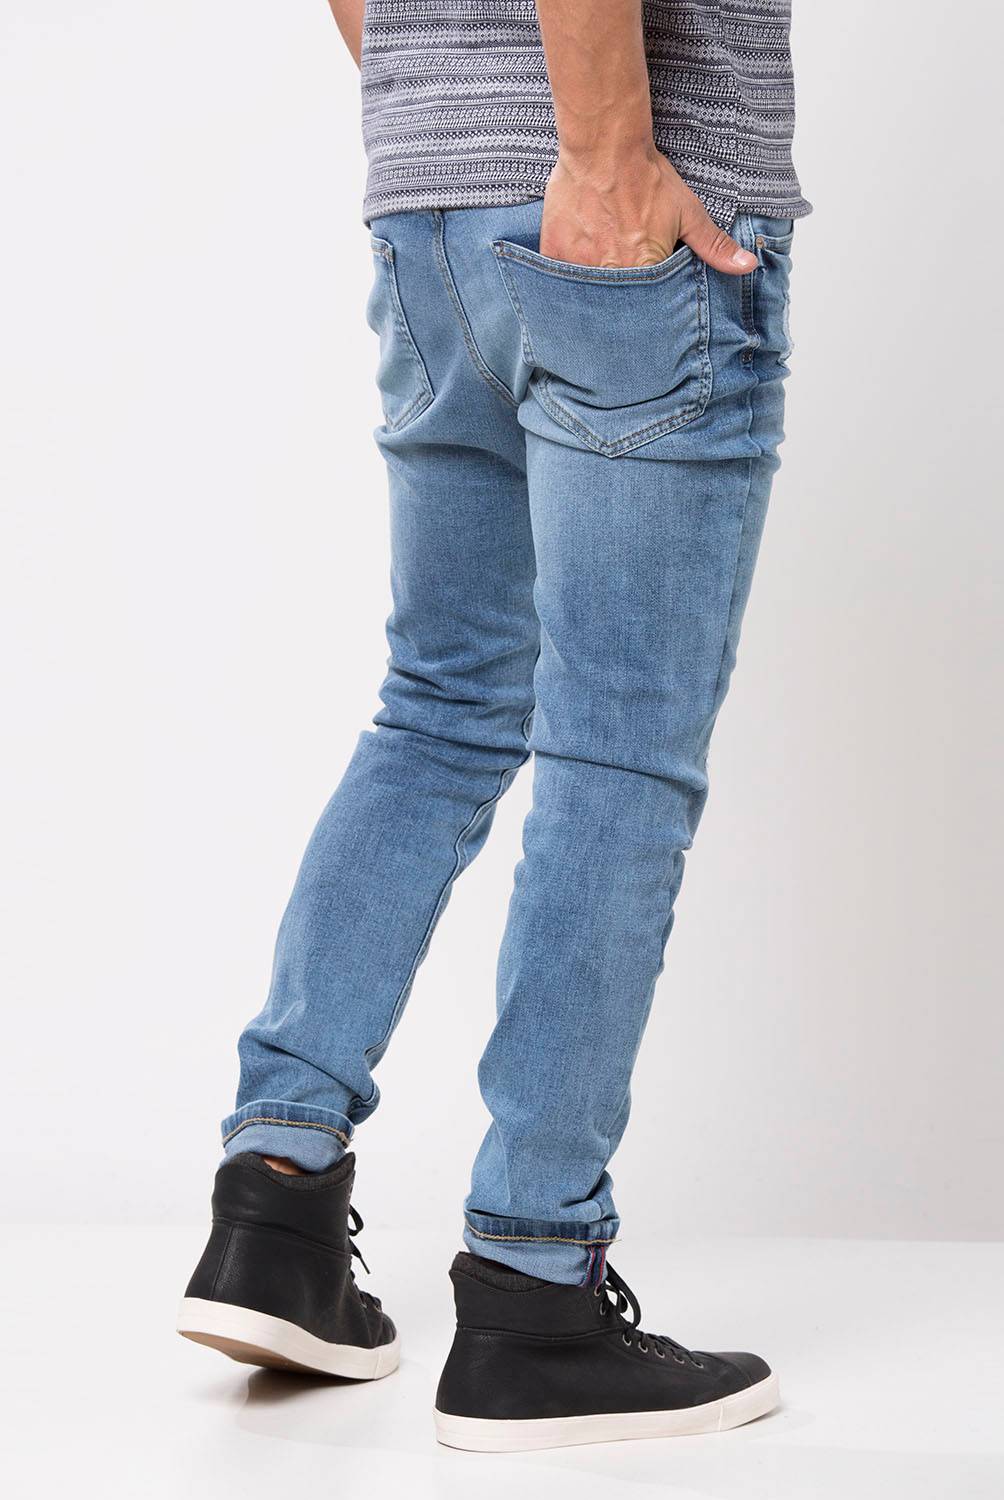 Americanino - Jeans Casual Slim Fit